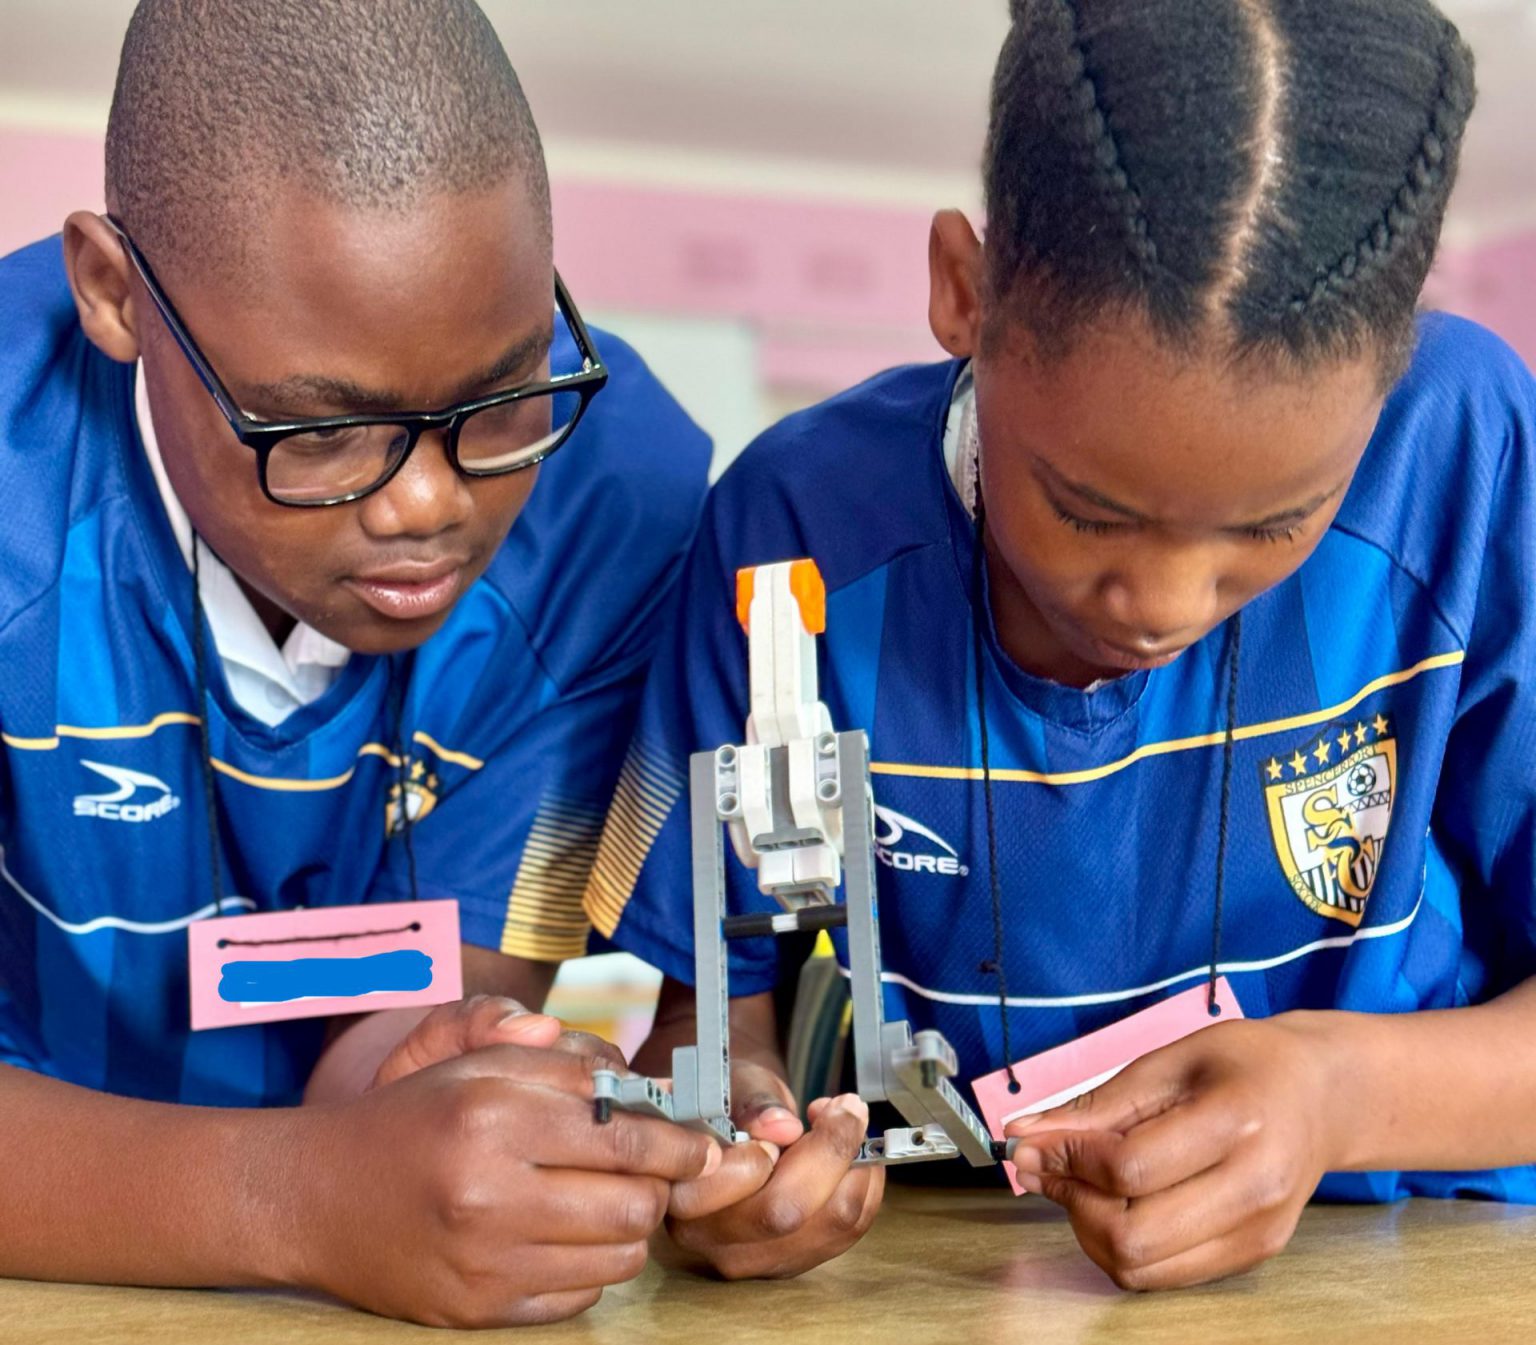 Teamwork: A tech team in Grade 6 collaborate to create a robotic arm that will respond to different intensities of “golf swings”. Photo: supplied